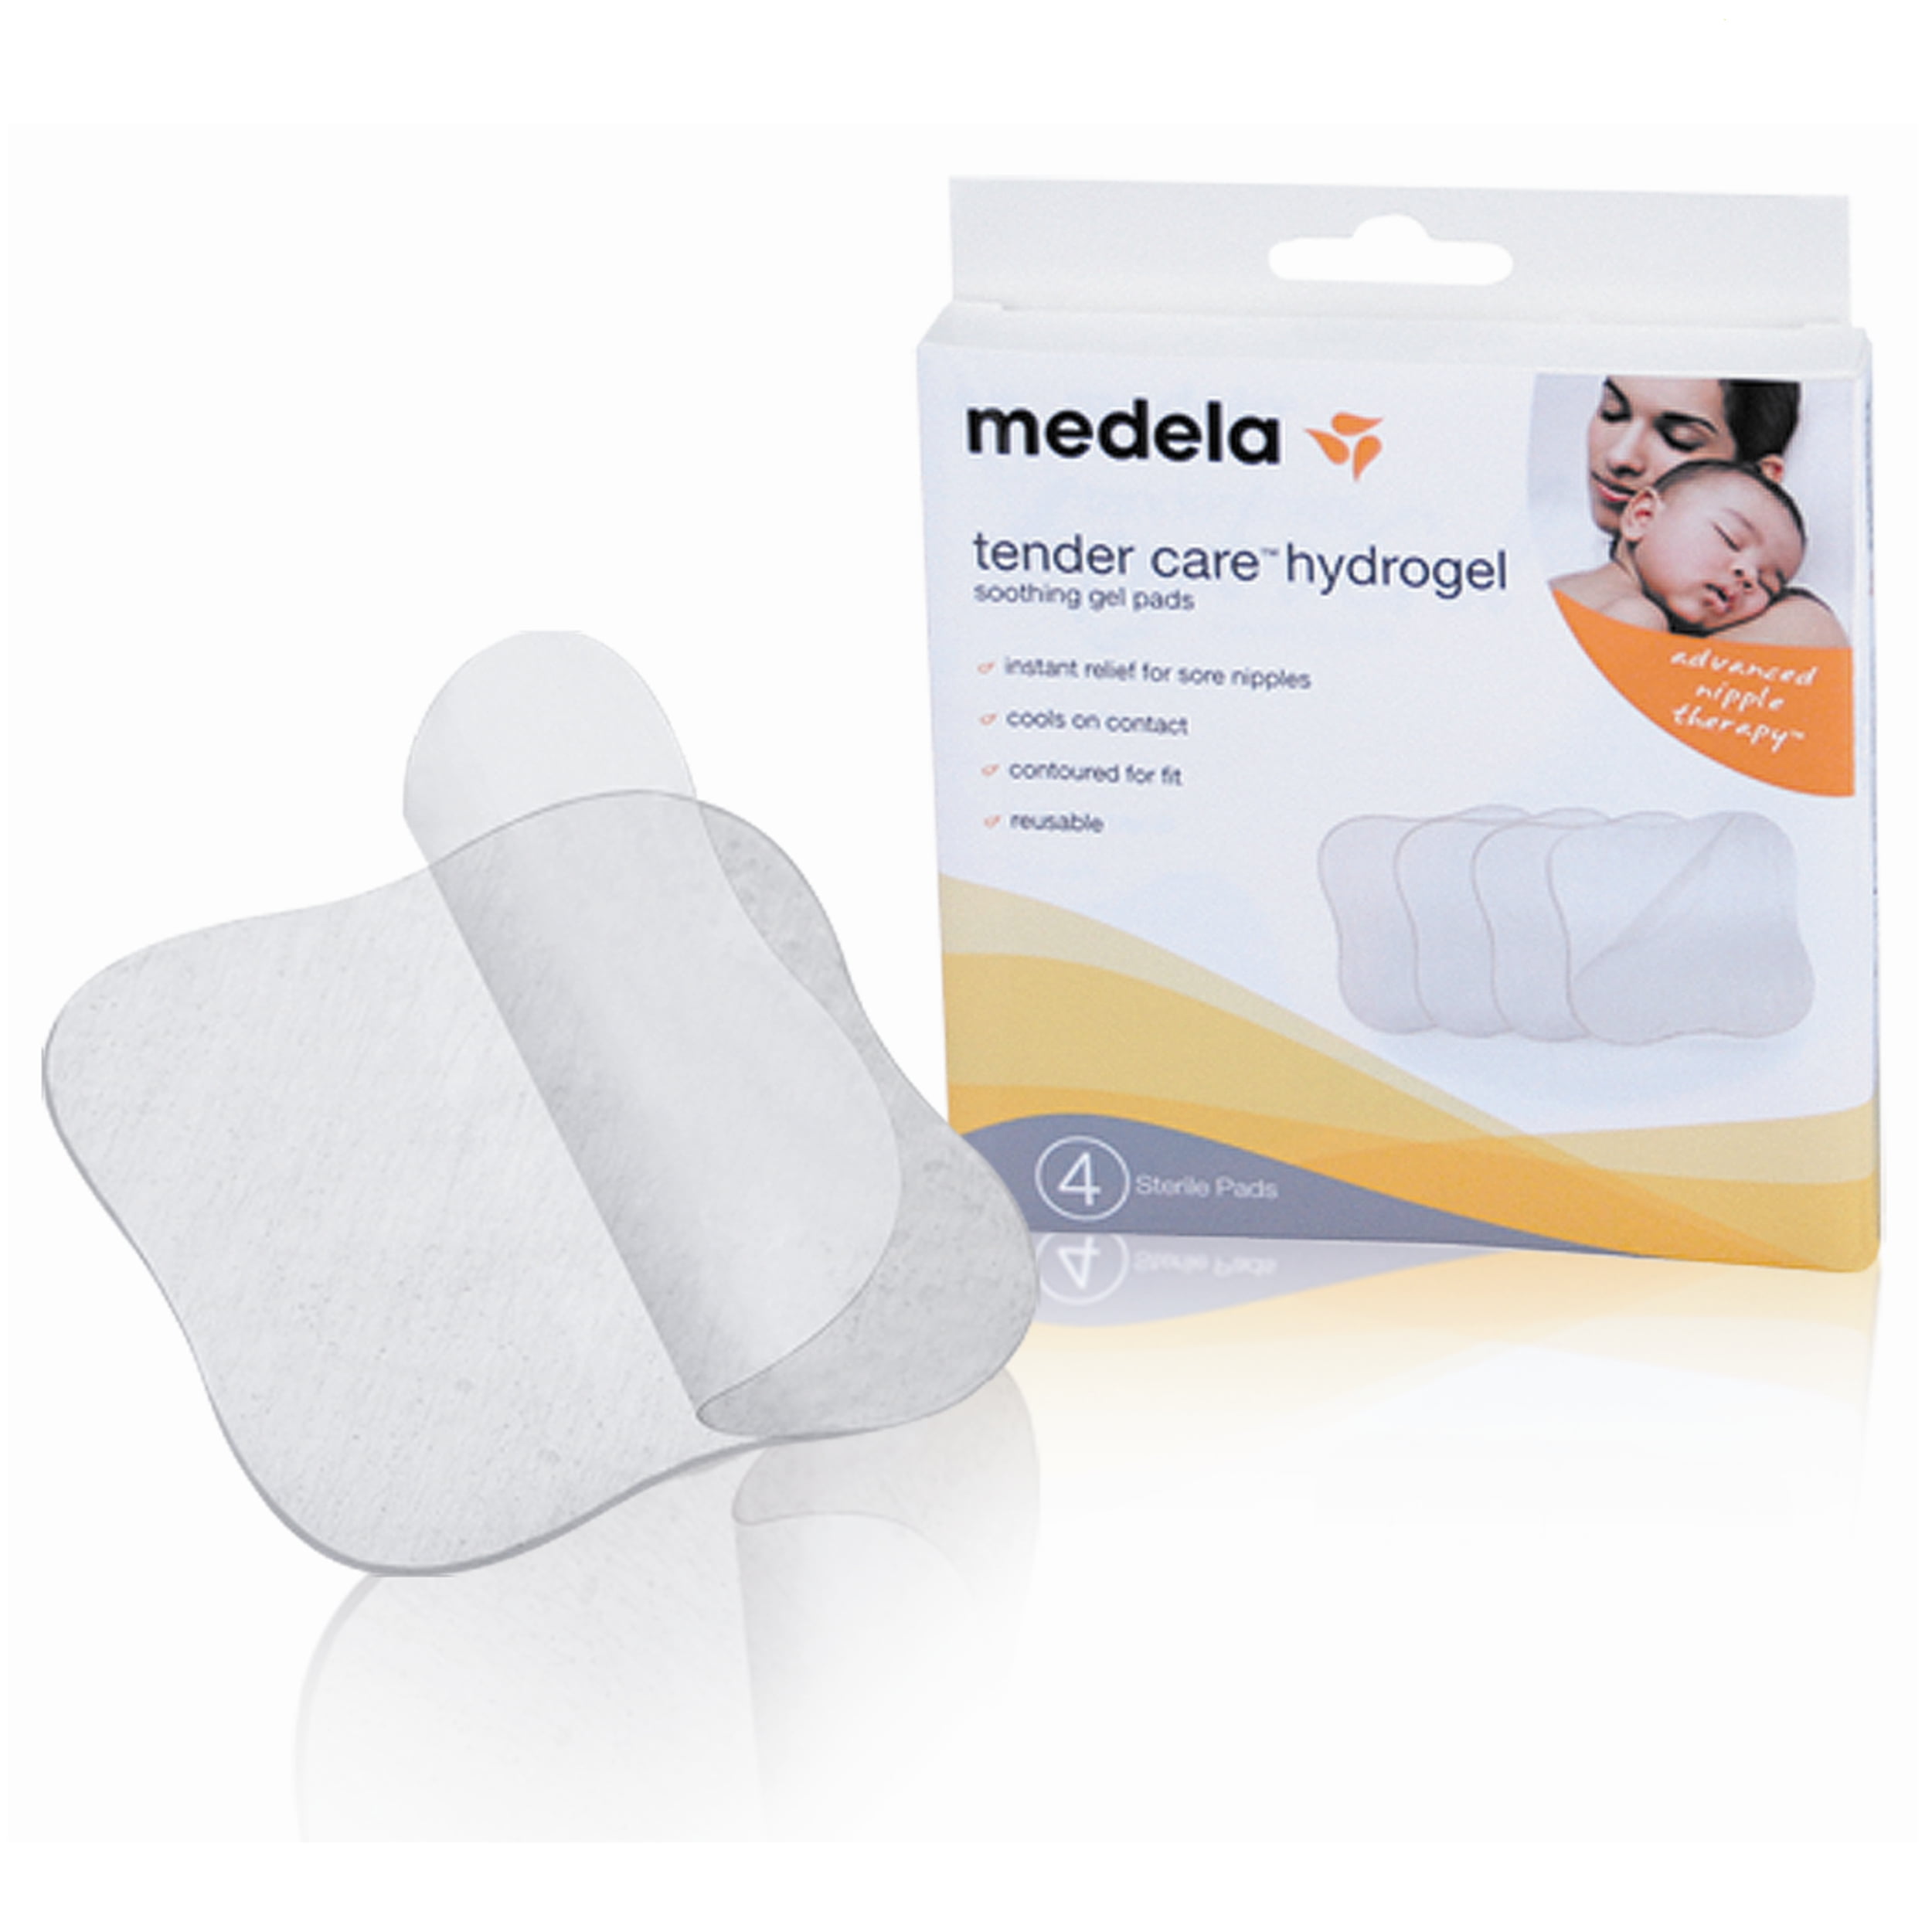 Tender Care Hydrogel Pads – Advanced Therapy for sore nipples - Medela